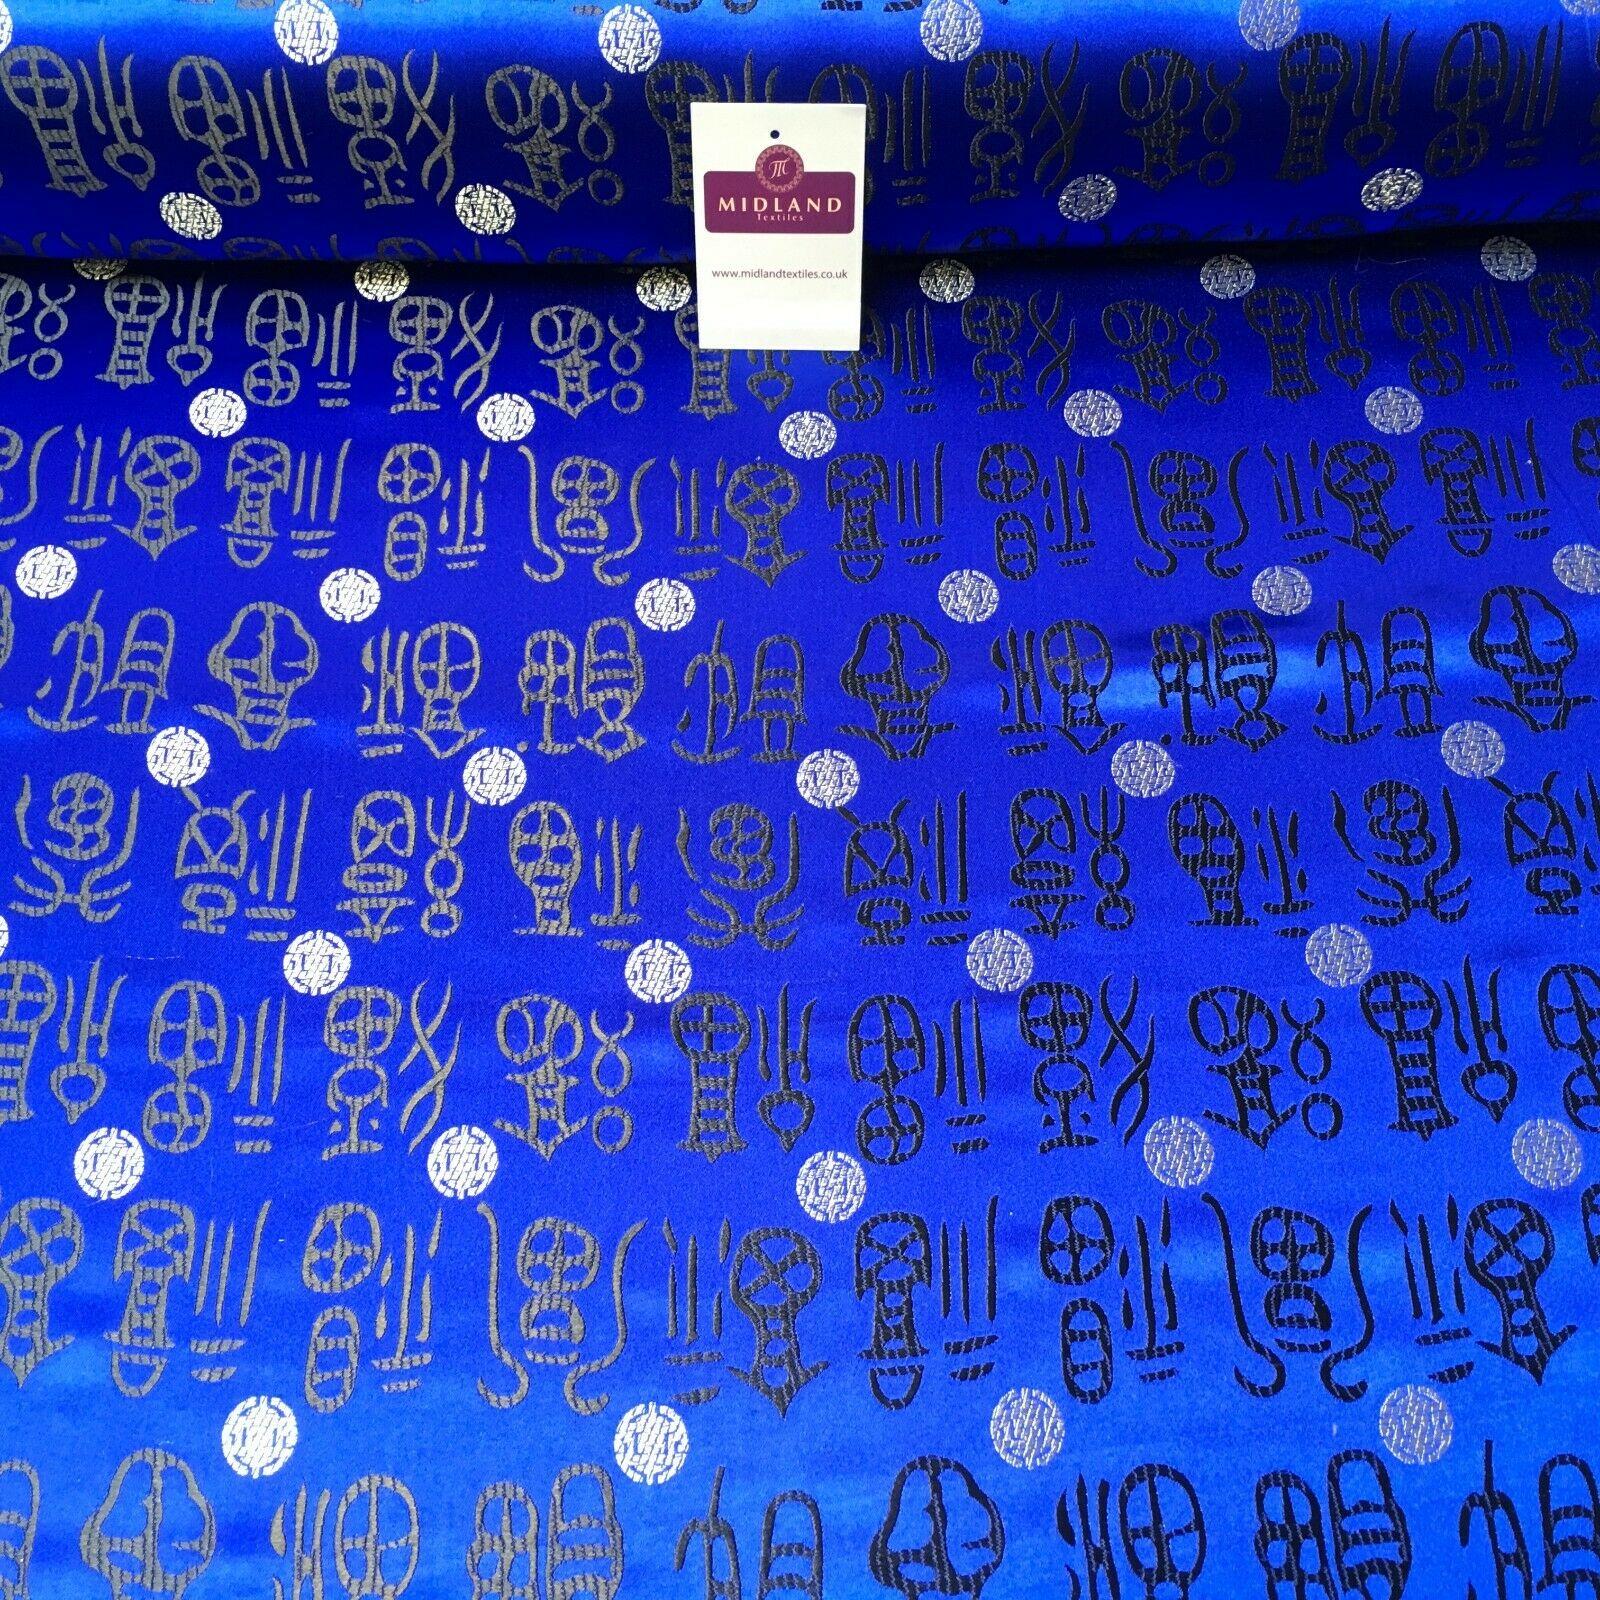 Royal Blue and Black Chinese Words & Medallion Brocade Fabric 110cm Wide M395-25